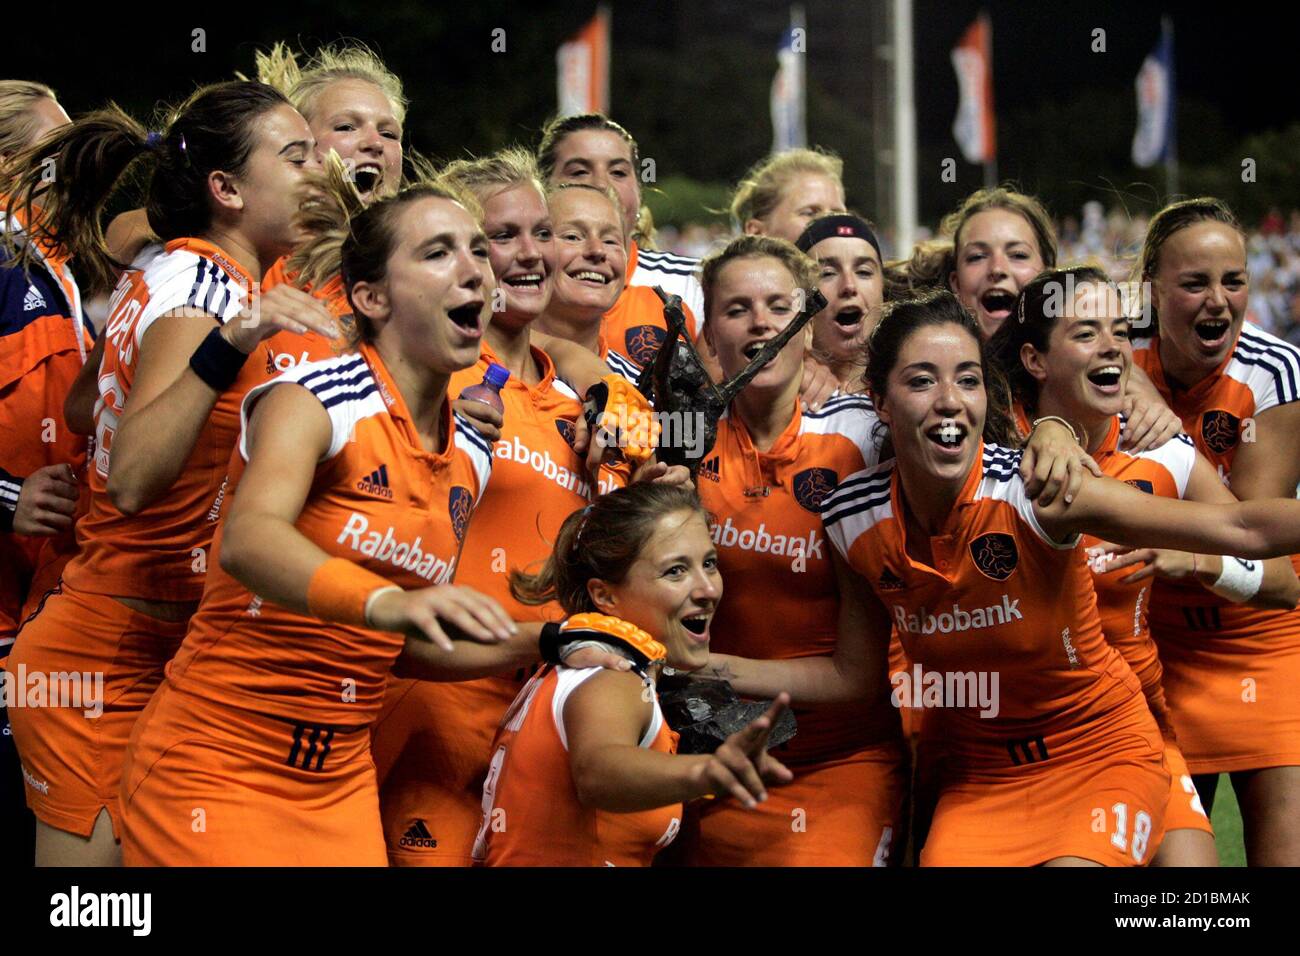 The Netherlands women field hockey team poses with the trophy after beating  Argentina 1-0 in their women's Champions Trophy final match in Quilmes, on  the outskirts of Buenos Aires, January 21, 2007.